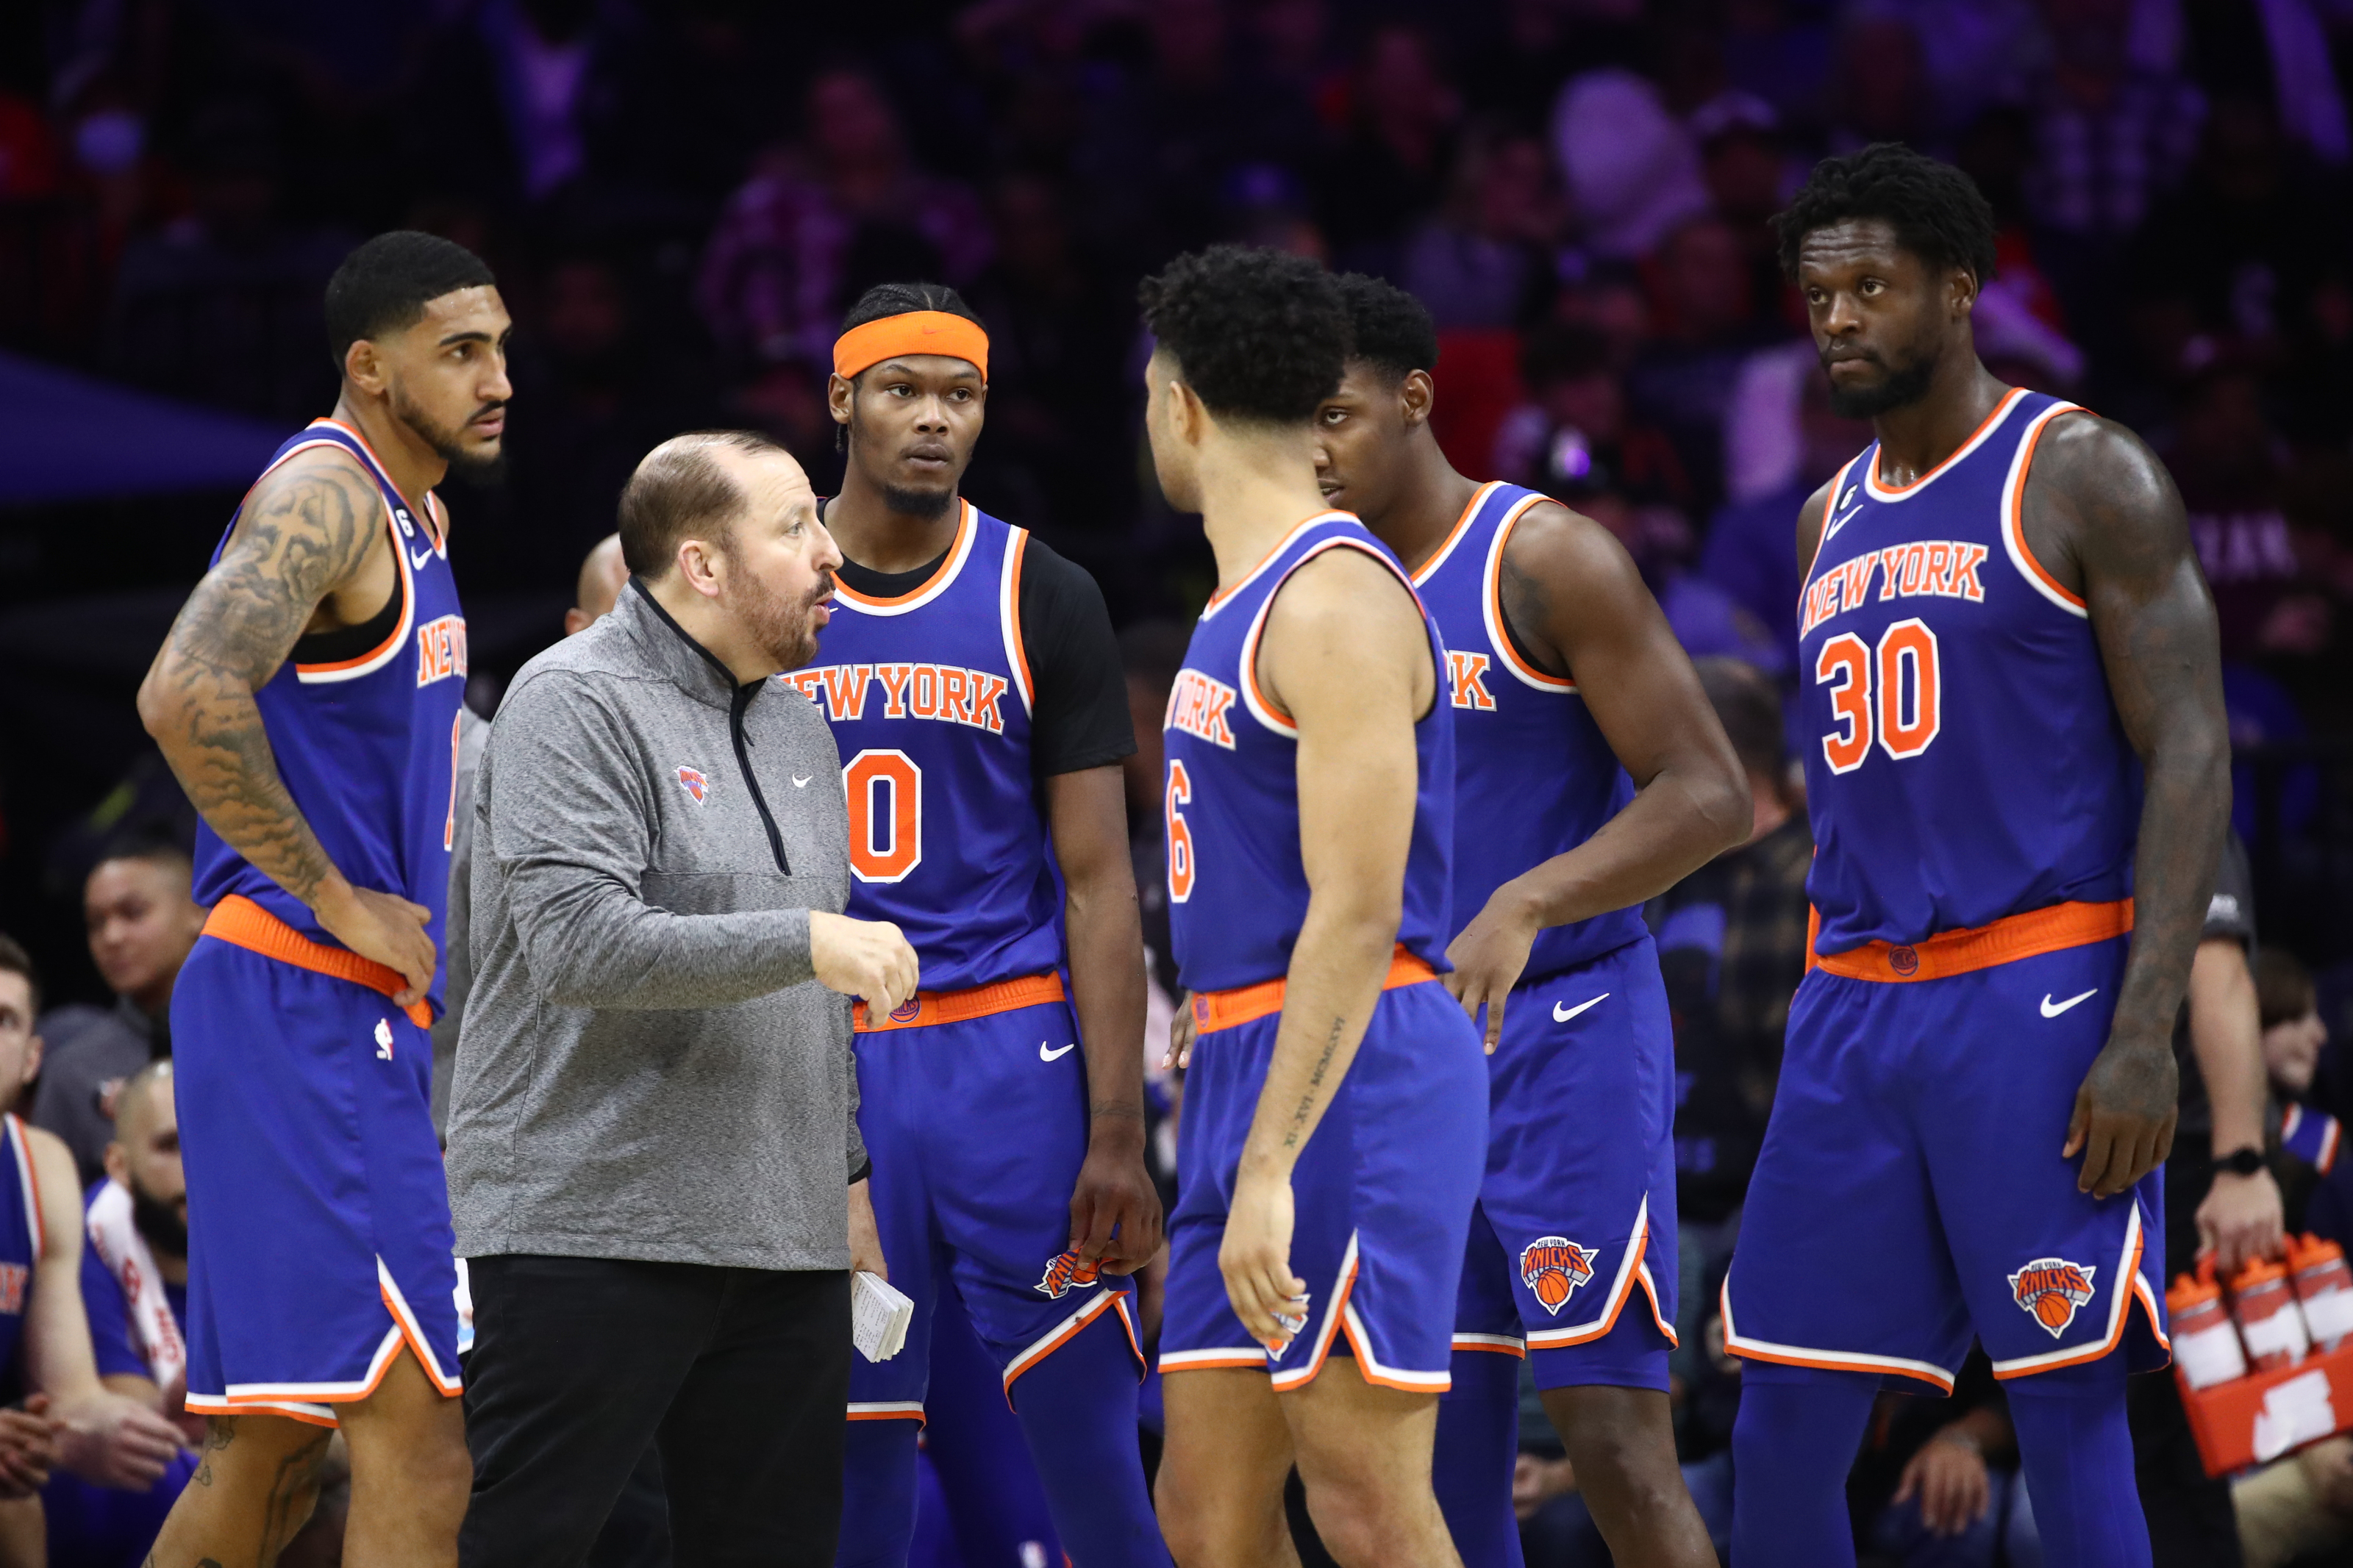 What we know about Knicks rotation decisions ahead of 2022-23 season